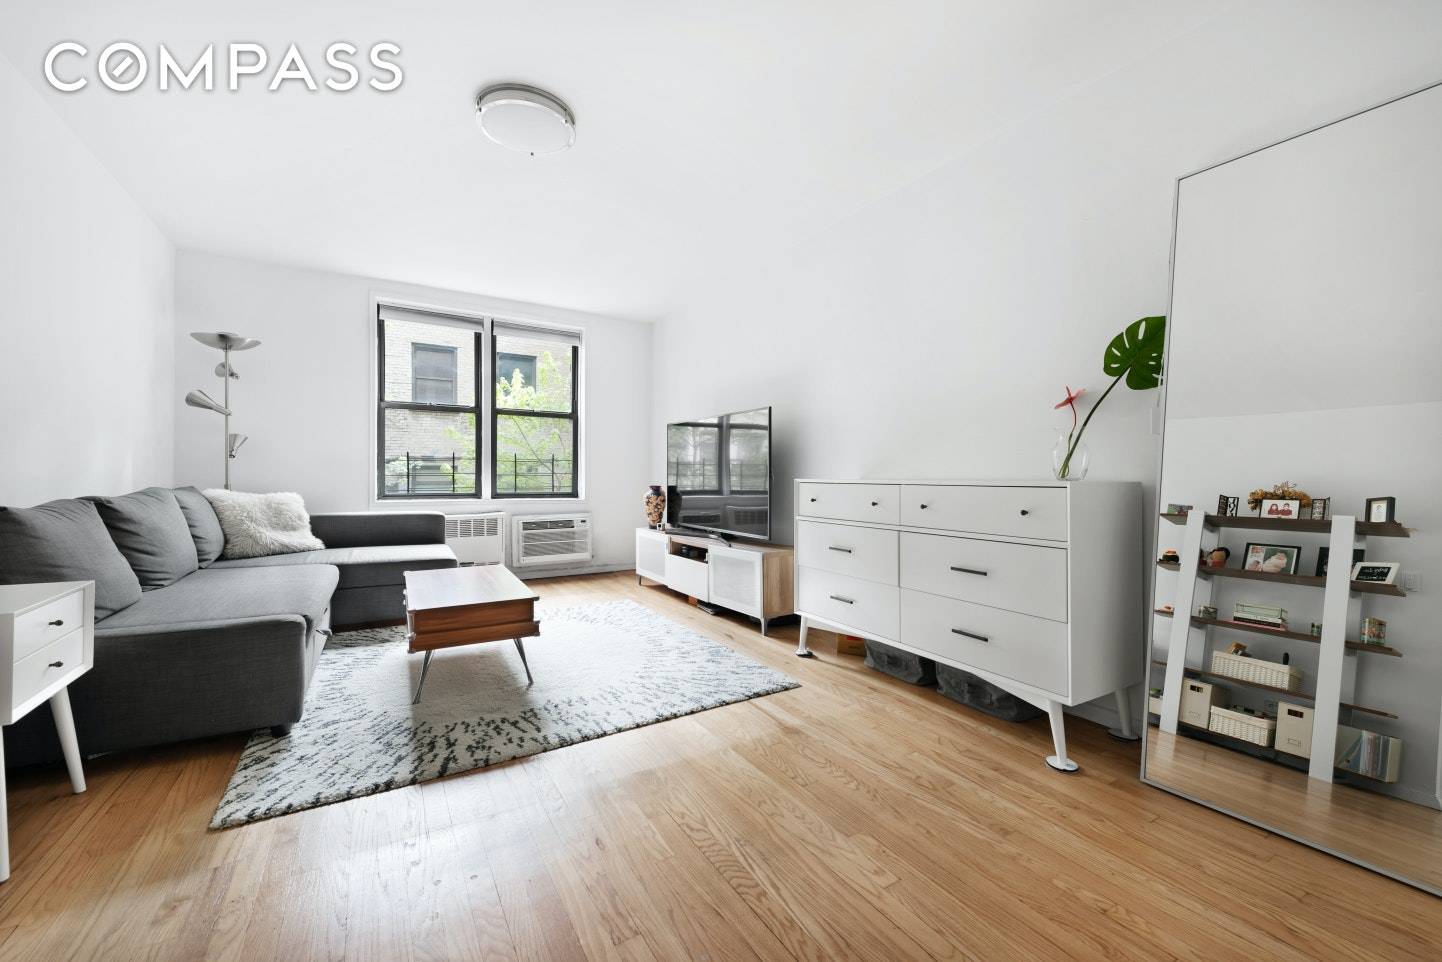 You will fall in love with this charming, bright and spacious one bedroom on beautiful tree lined East 27th Street.